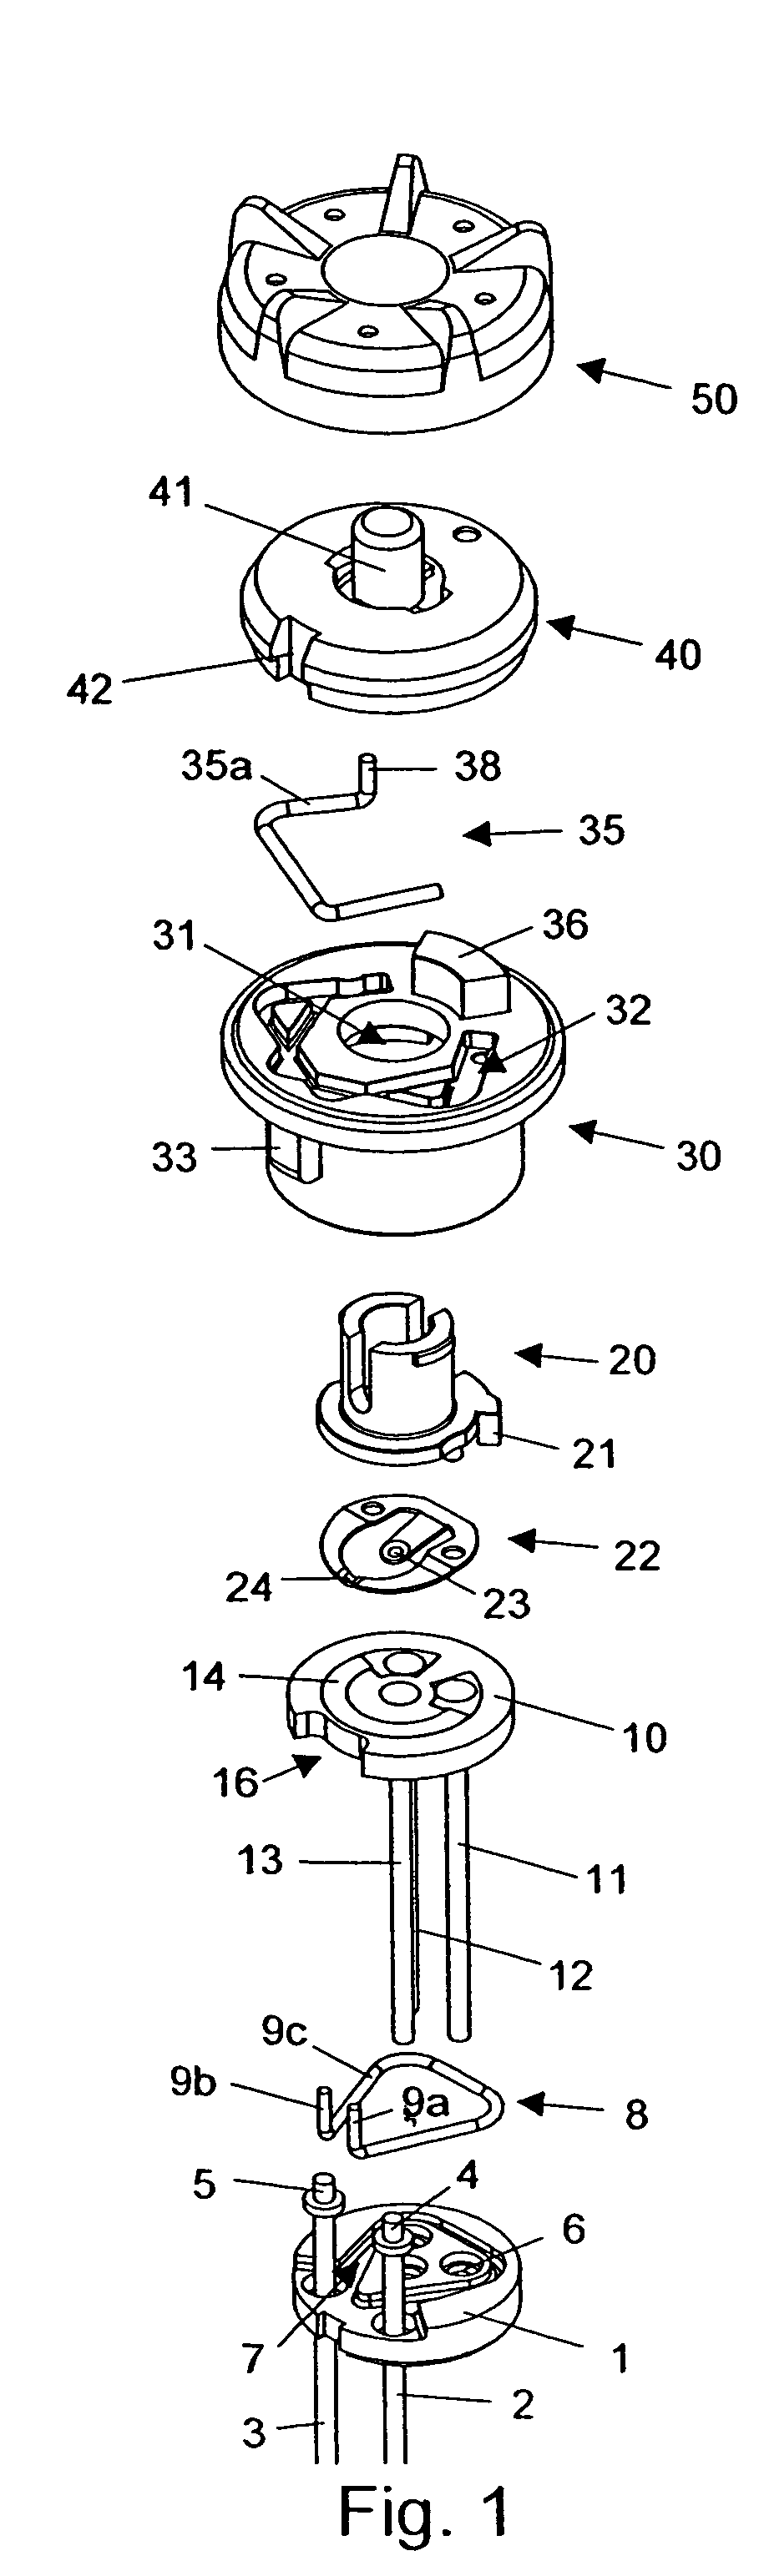 Integrated volume control and switch assembly